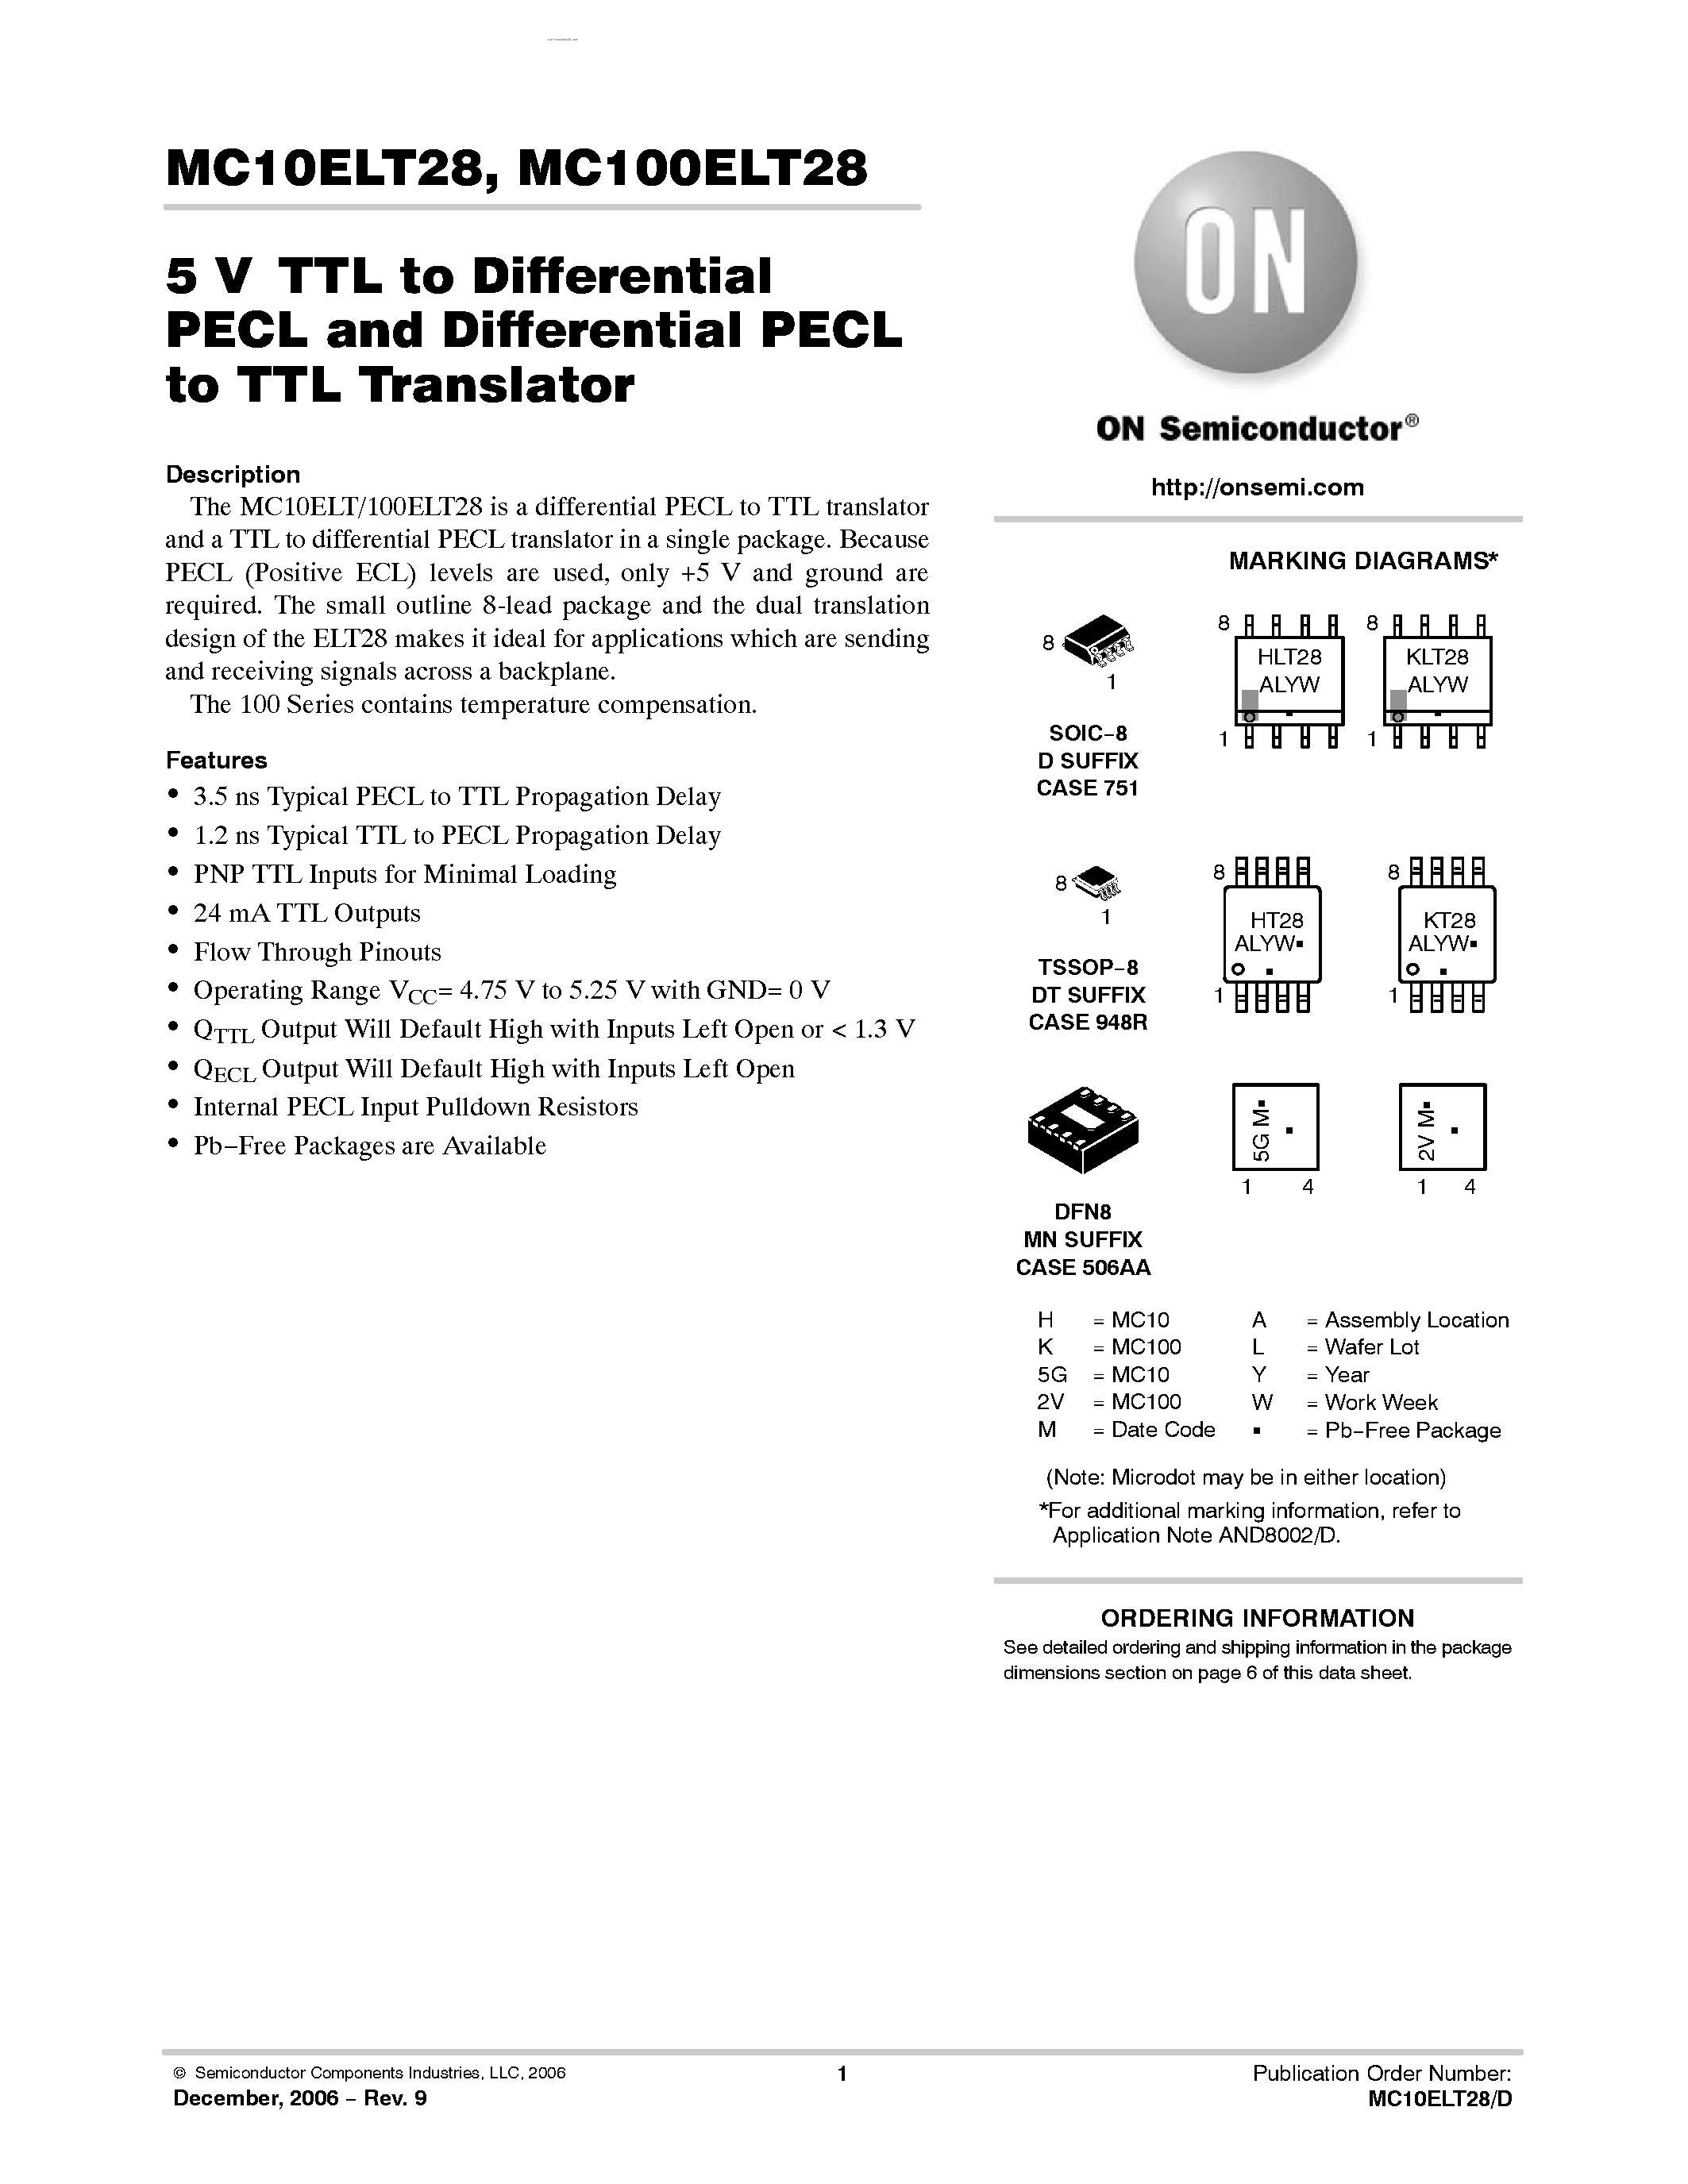 Datasheet MC100ELT28 - TTL to Differential PECL/Differential PECL to TTL Translator page 1